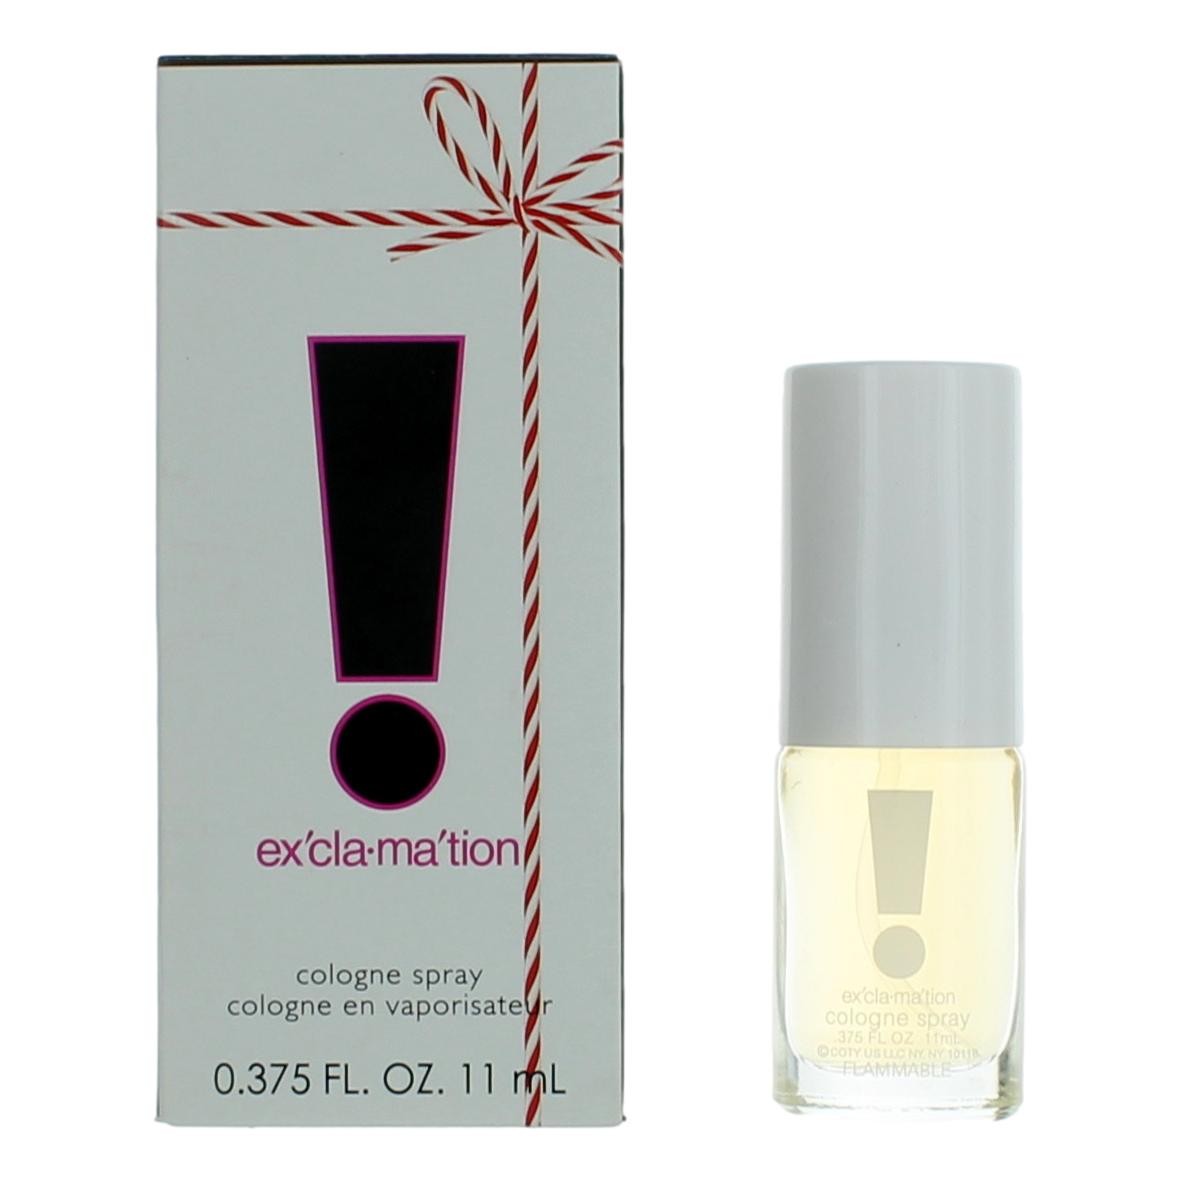 EAN 3616302024704 product image for awexc037s 0.375 oz Exclamation Cologne Spray for Women | upcitemdb.com